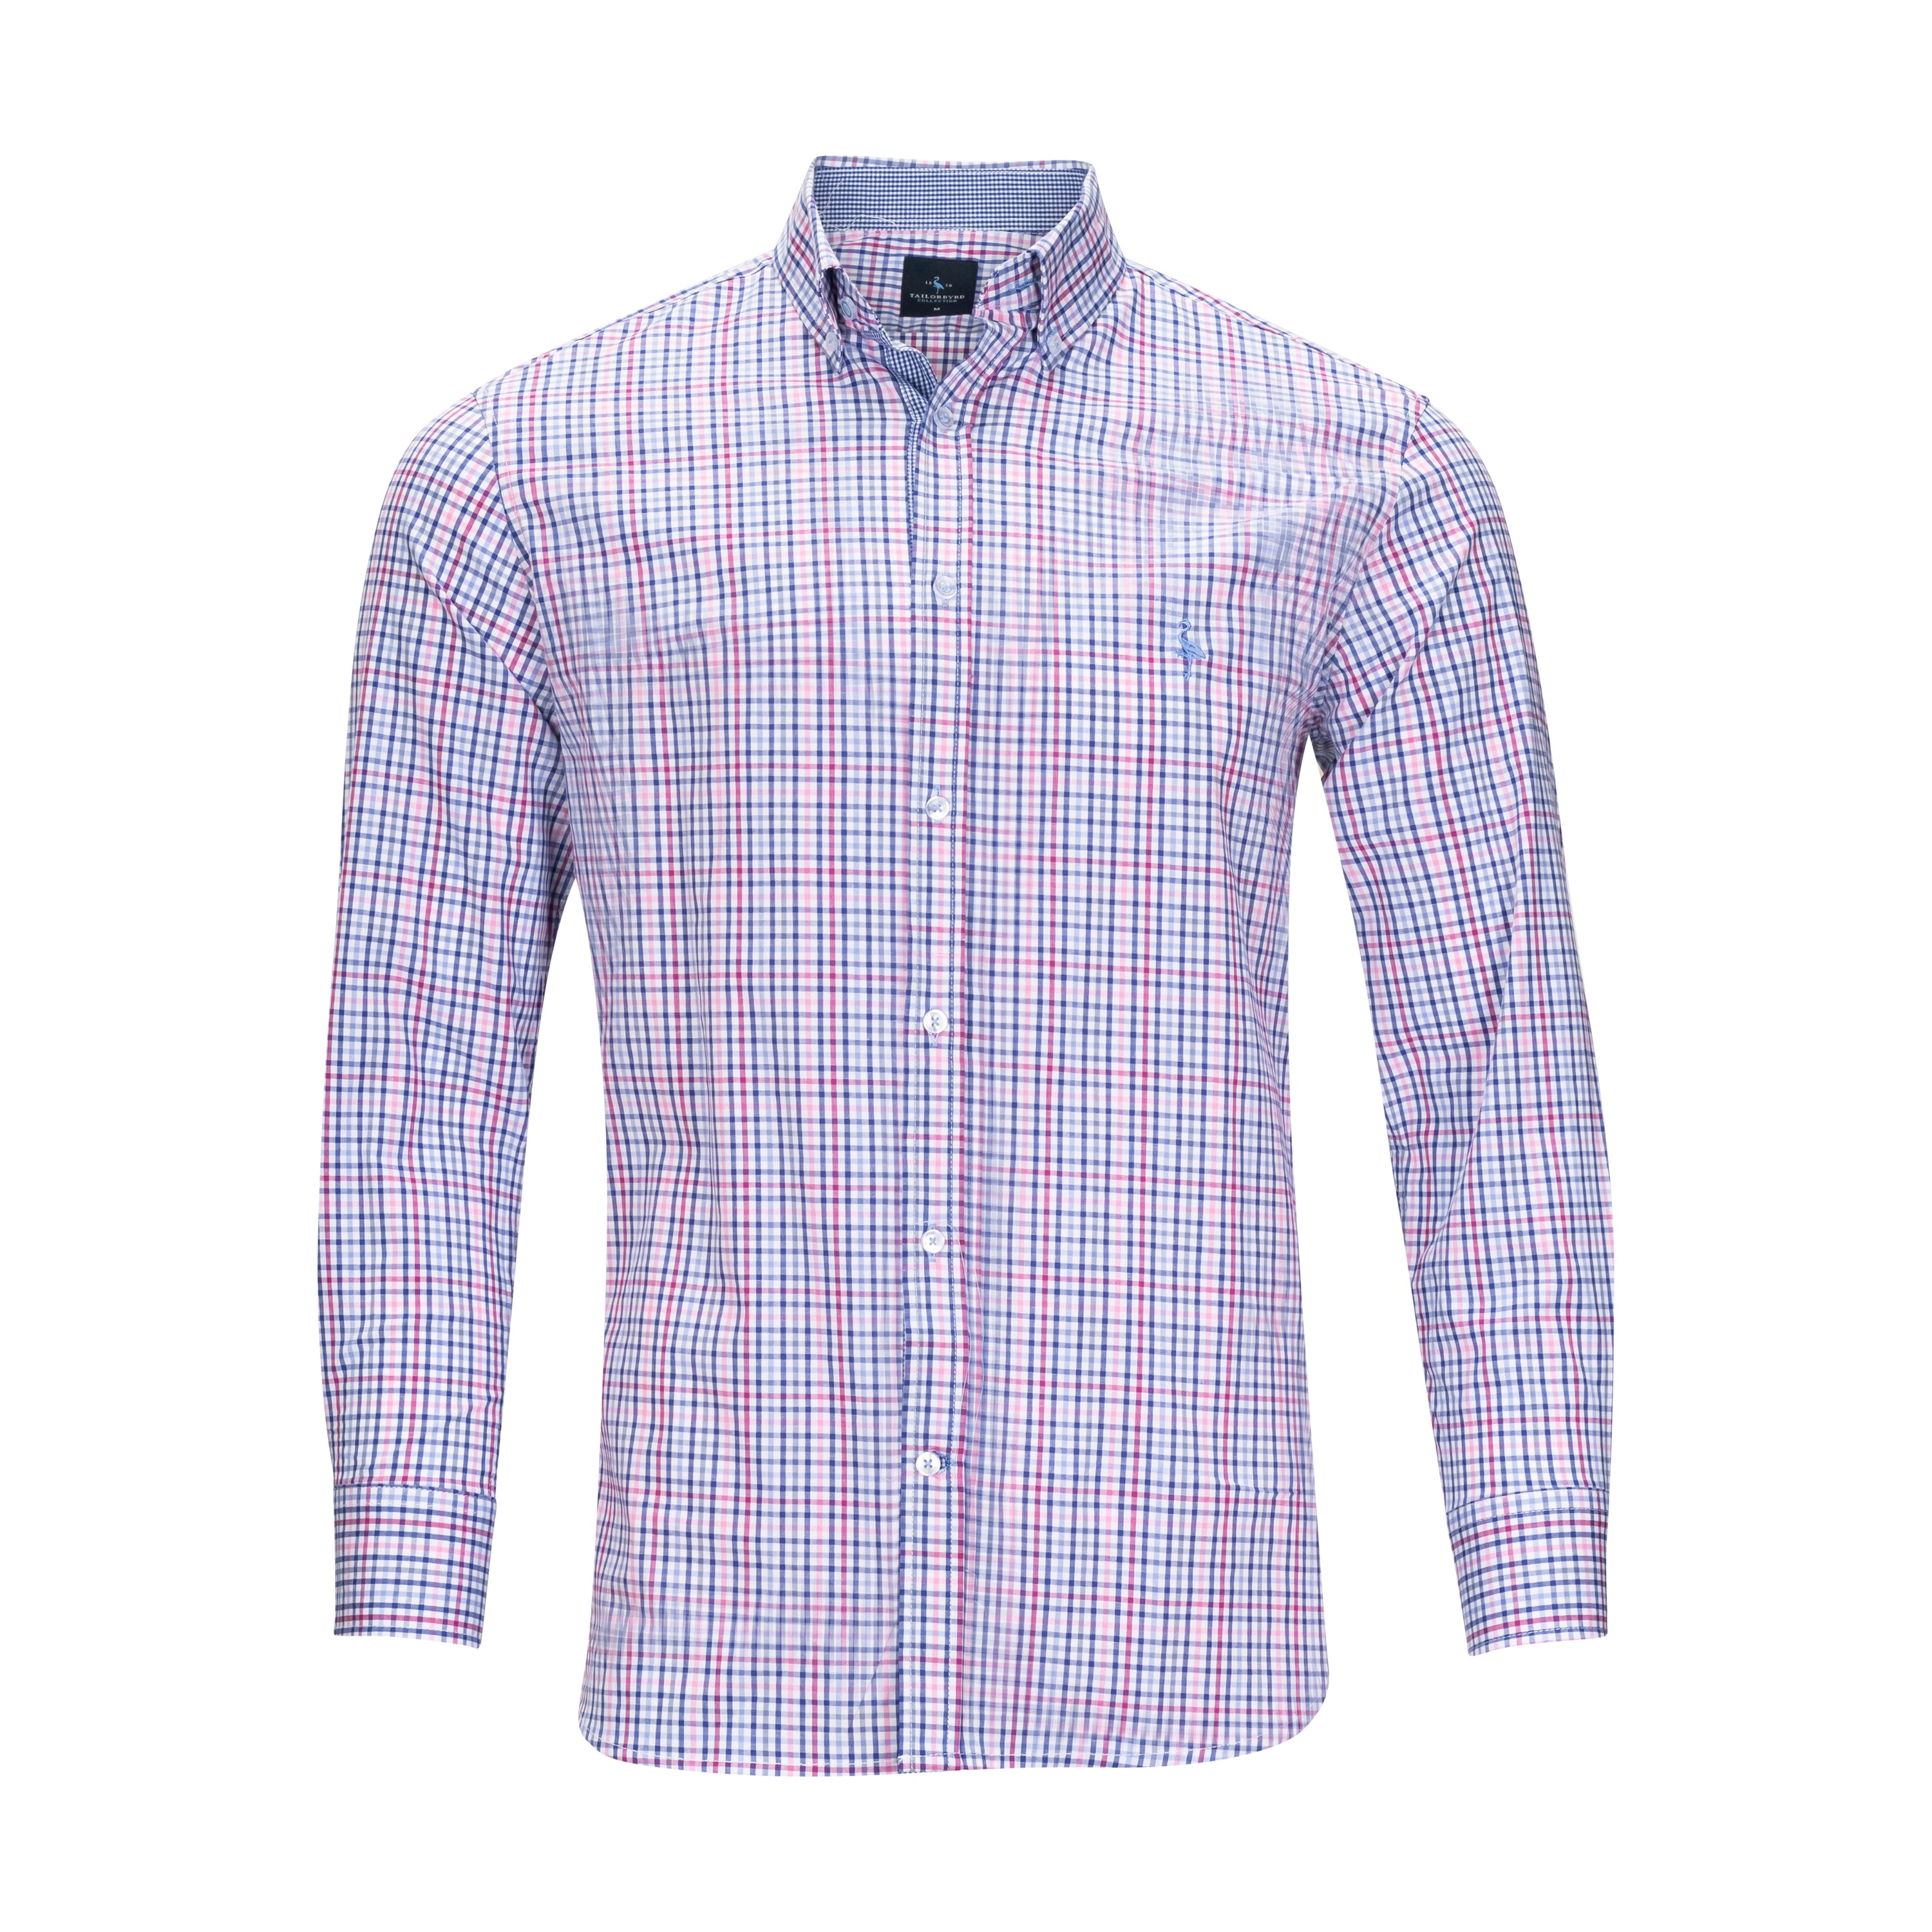 TAILORBYRD MULTICOLOR GINGHAM SHIRT – Miltons - The Store for Men